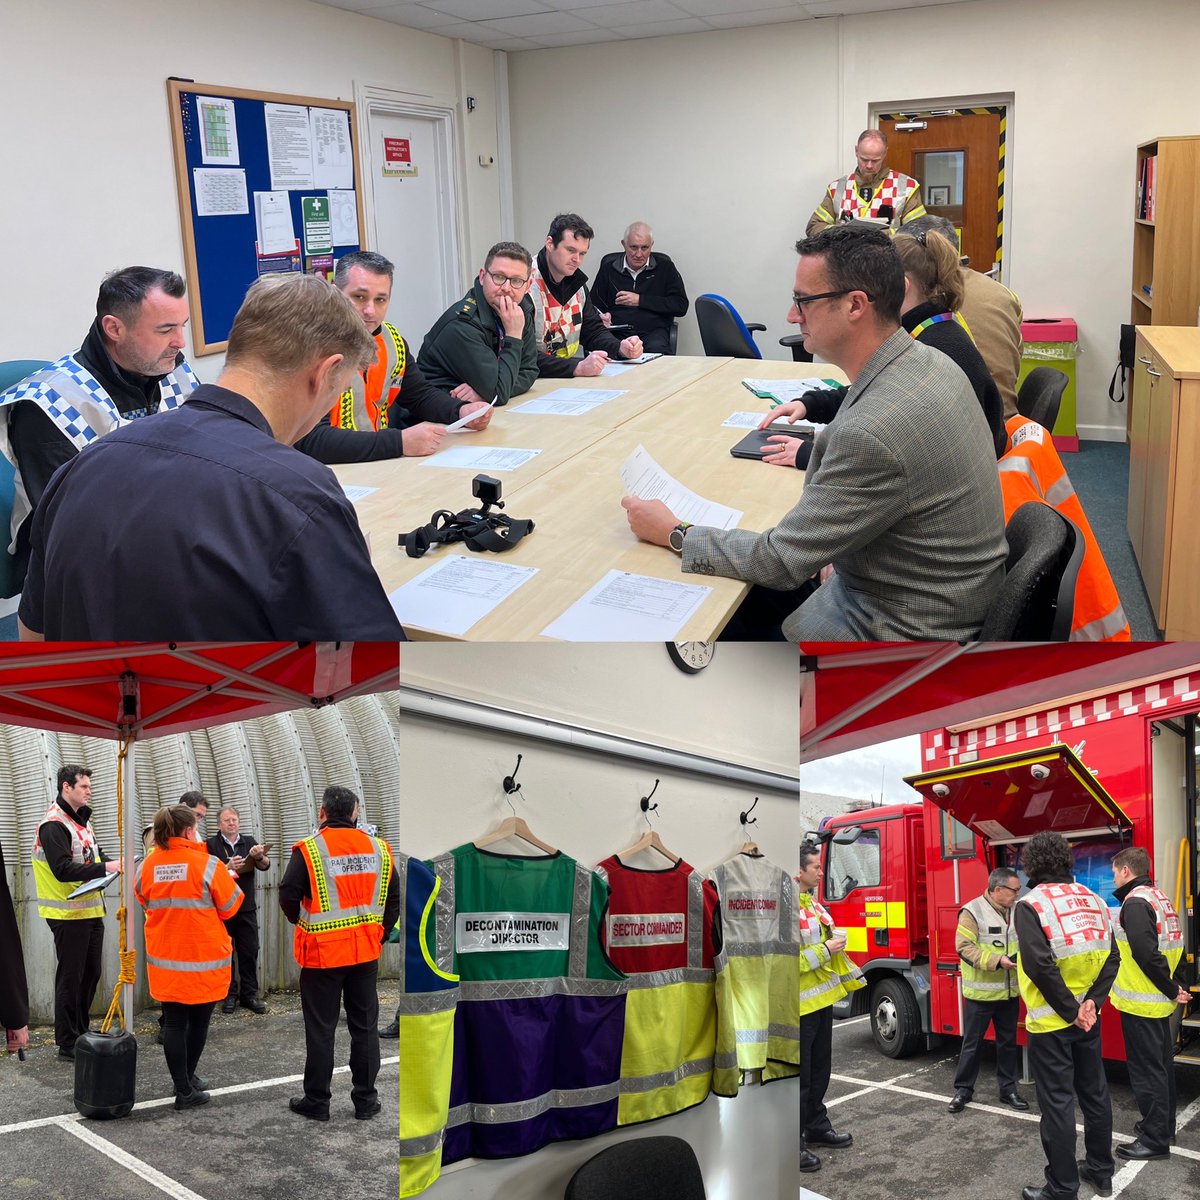 Two great days assisting @HFRS with the selection process for the post of Area Commander. Working in partnership with the training team and the Incident Command Unit Crew we ran one of our non fire scenarios to to assess the Command capabilities of the candidates.